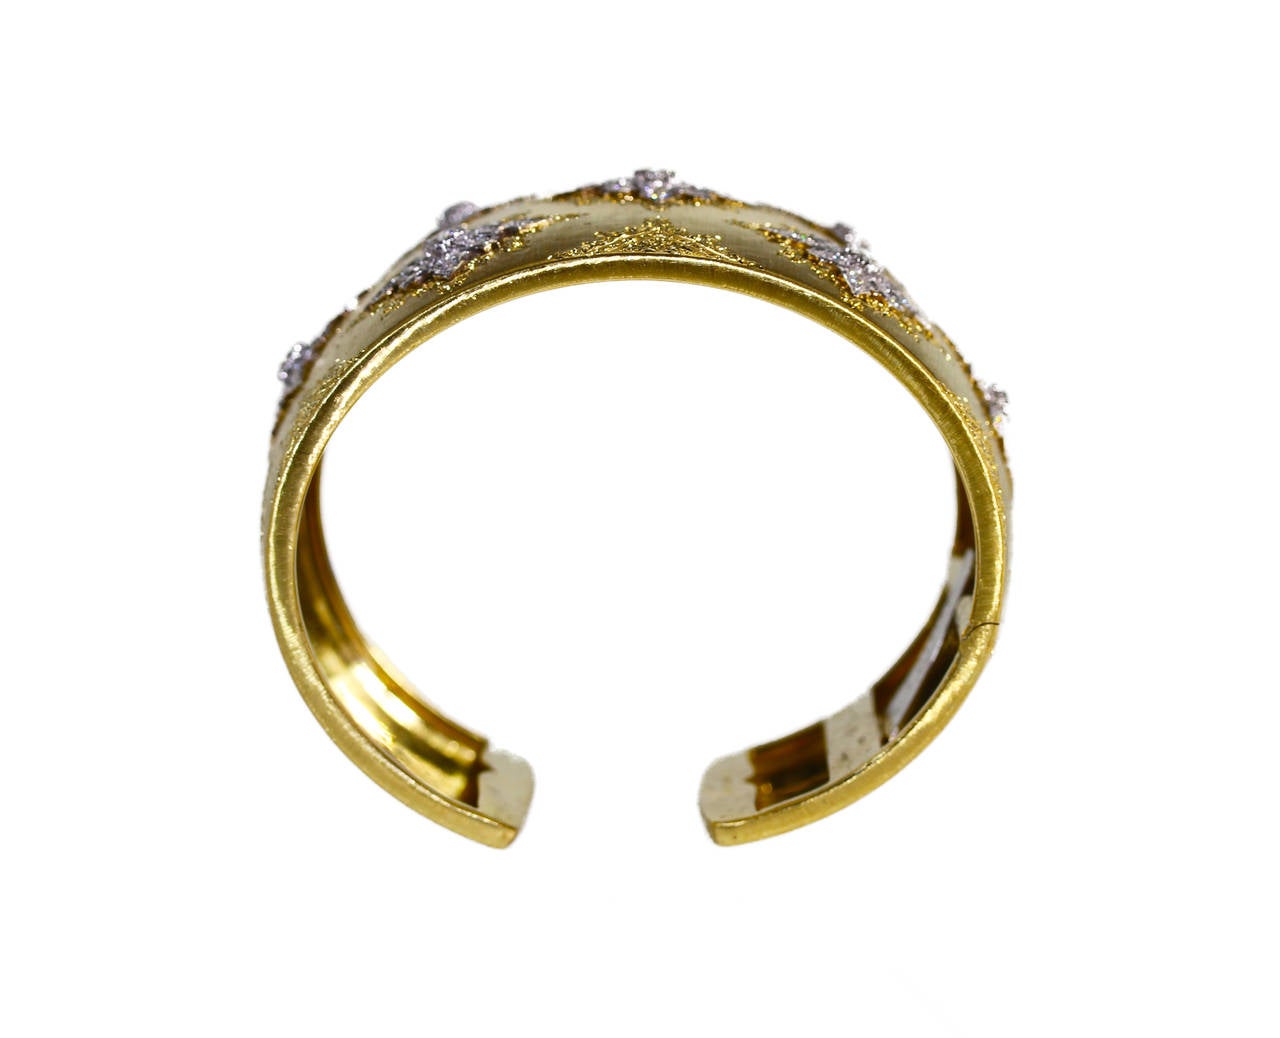 An 18 karat yellow gold and diamond cuff bracelet by Buccellati, Italy, the wide tapered cuff of brushed and engraved gold design set with seven openwork white gold plaques set with 133 round diamonds weighing approximately 3.00 carats, gross weight